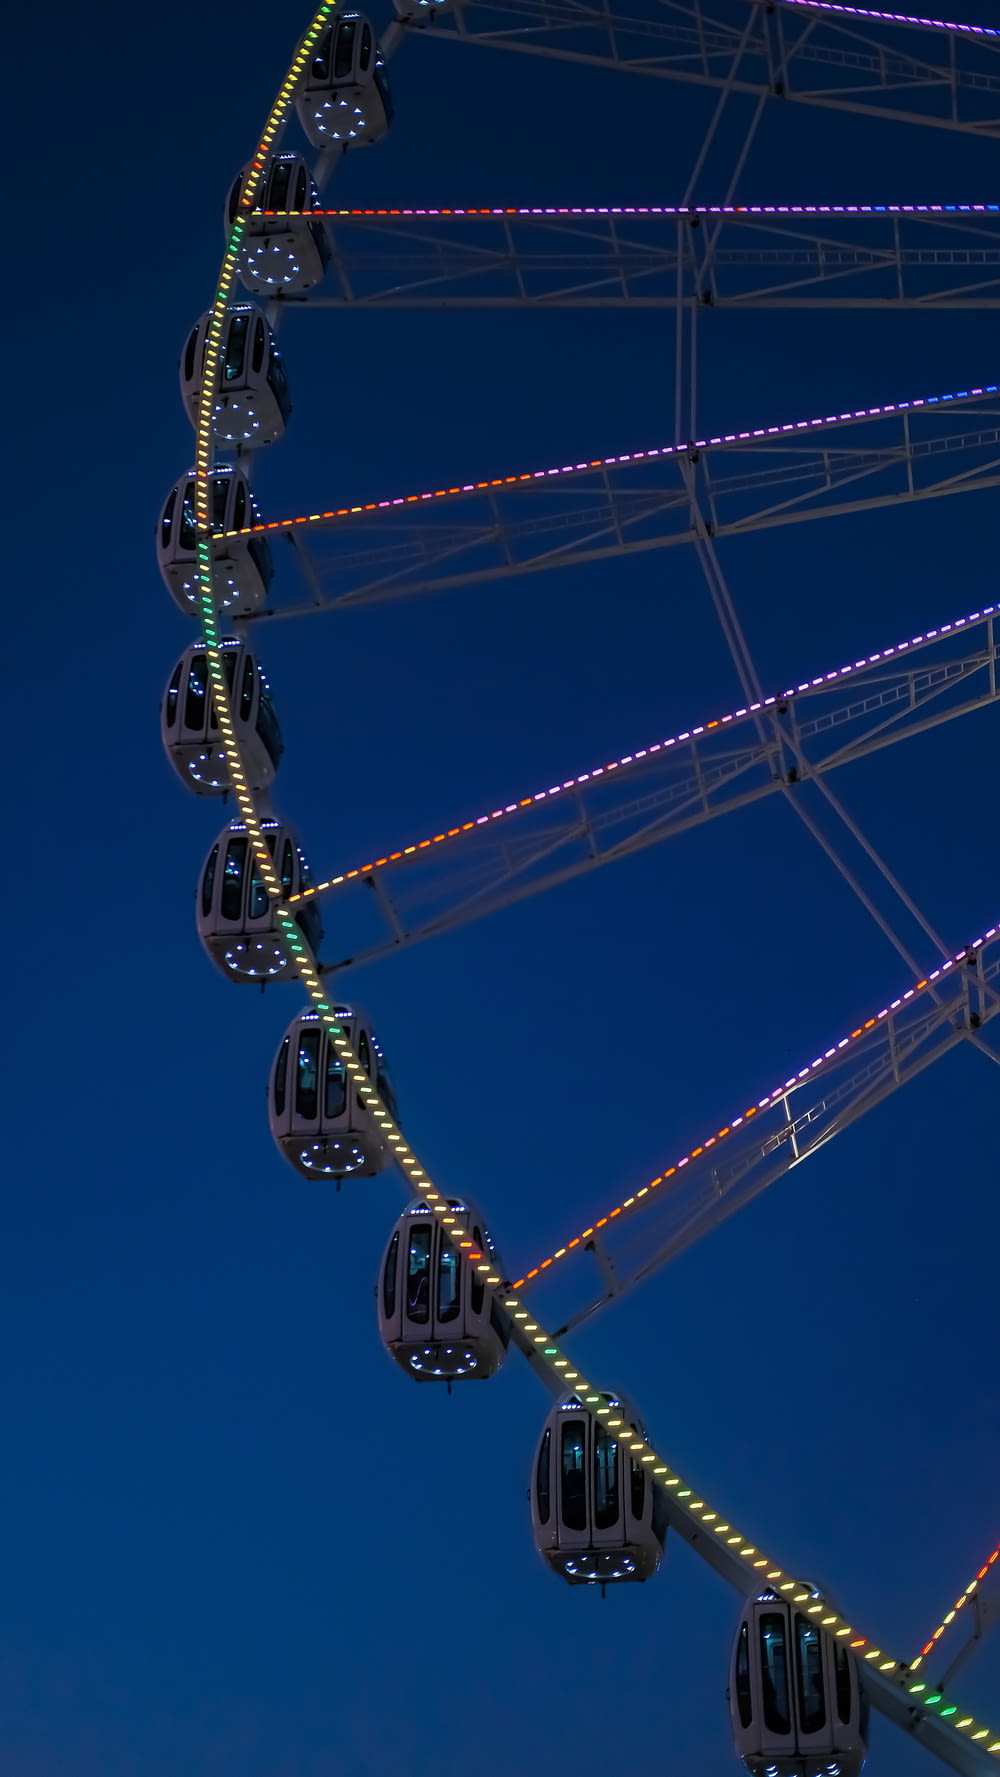 a ferris wheel lit up at night in the sky